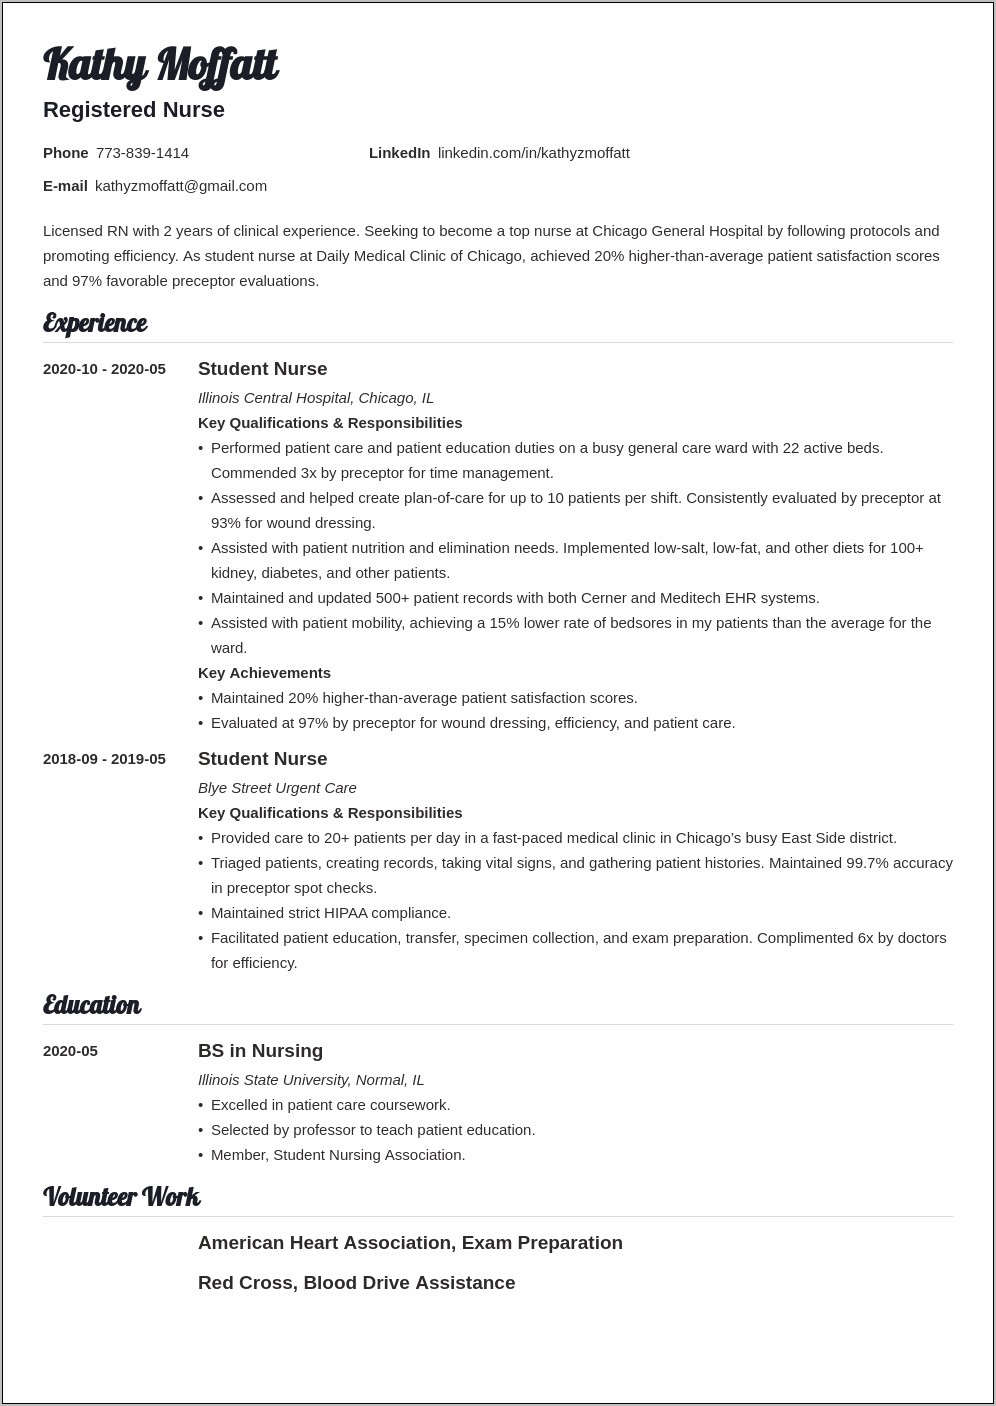 Should New Grad Resume Have Objective